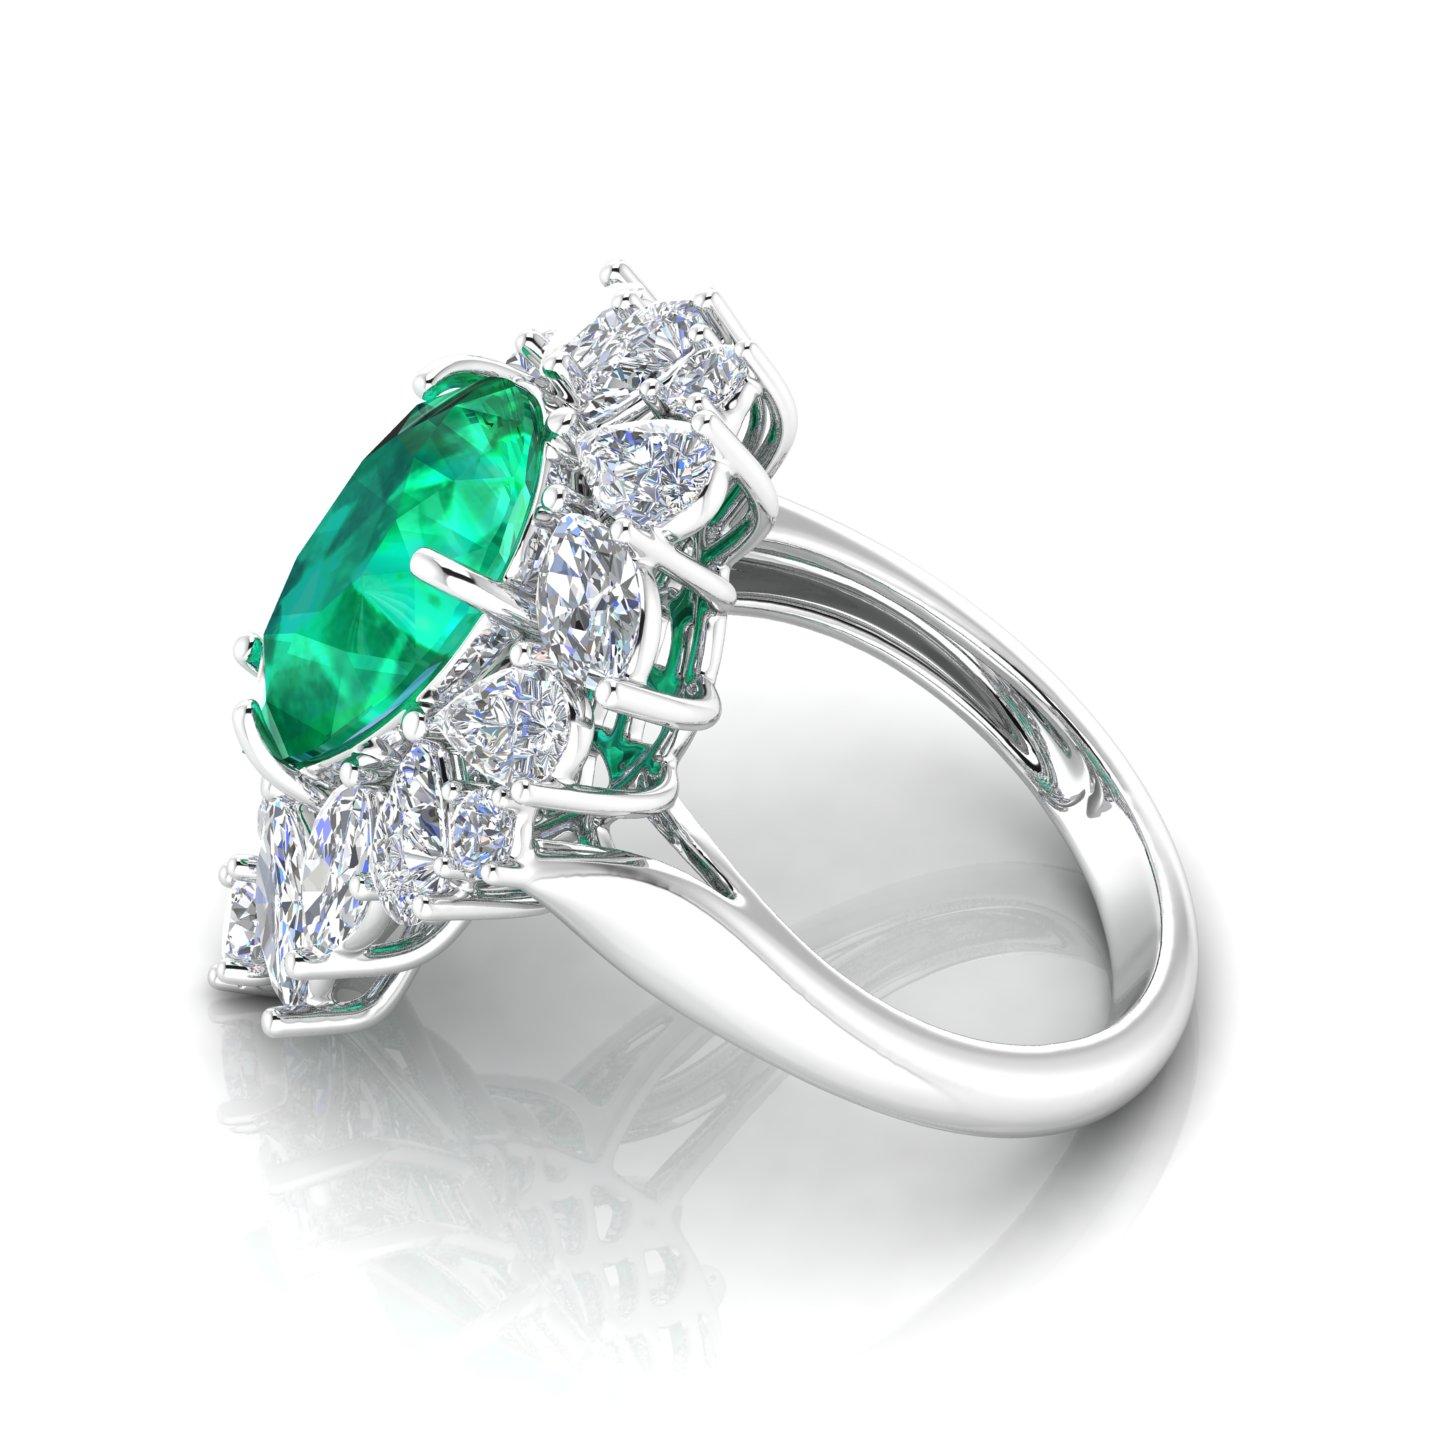 For Sale:  Pear Natural Emerald Gemstone Ring Diamond Solid 18k White Gold Fine Jewelry 9